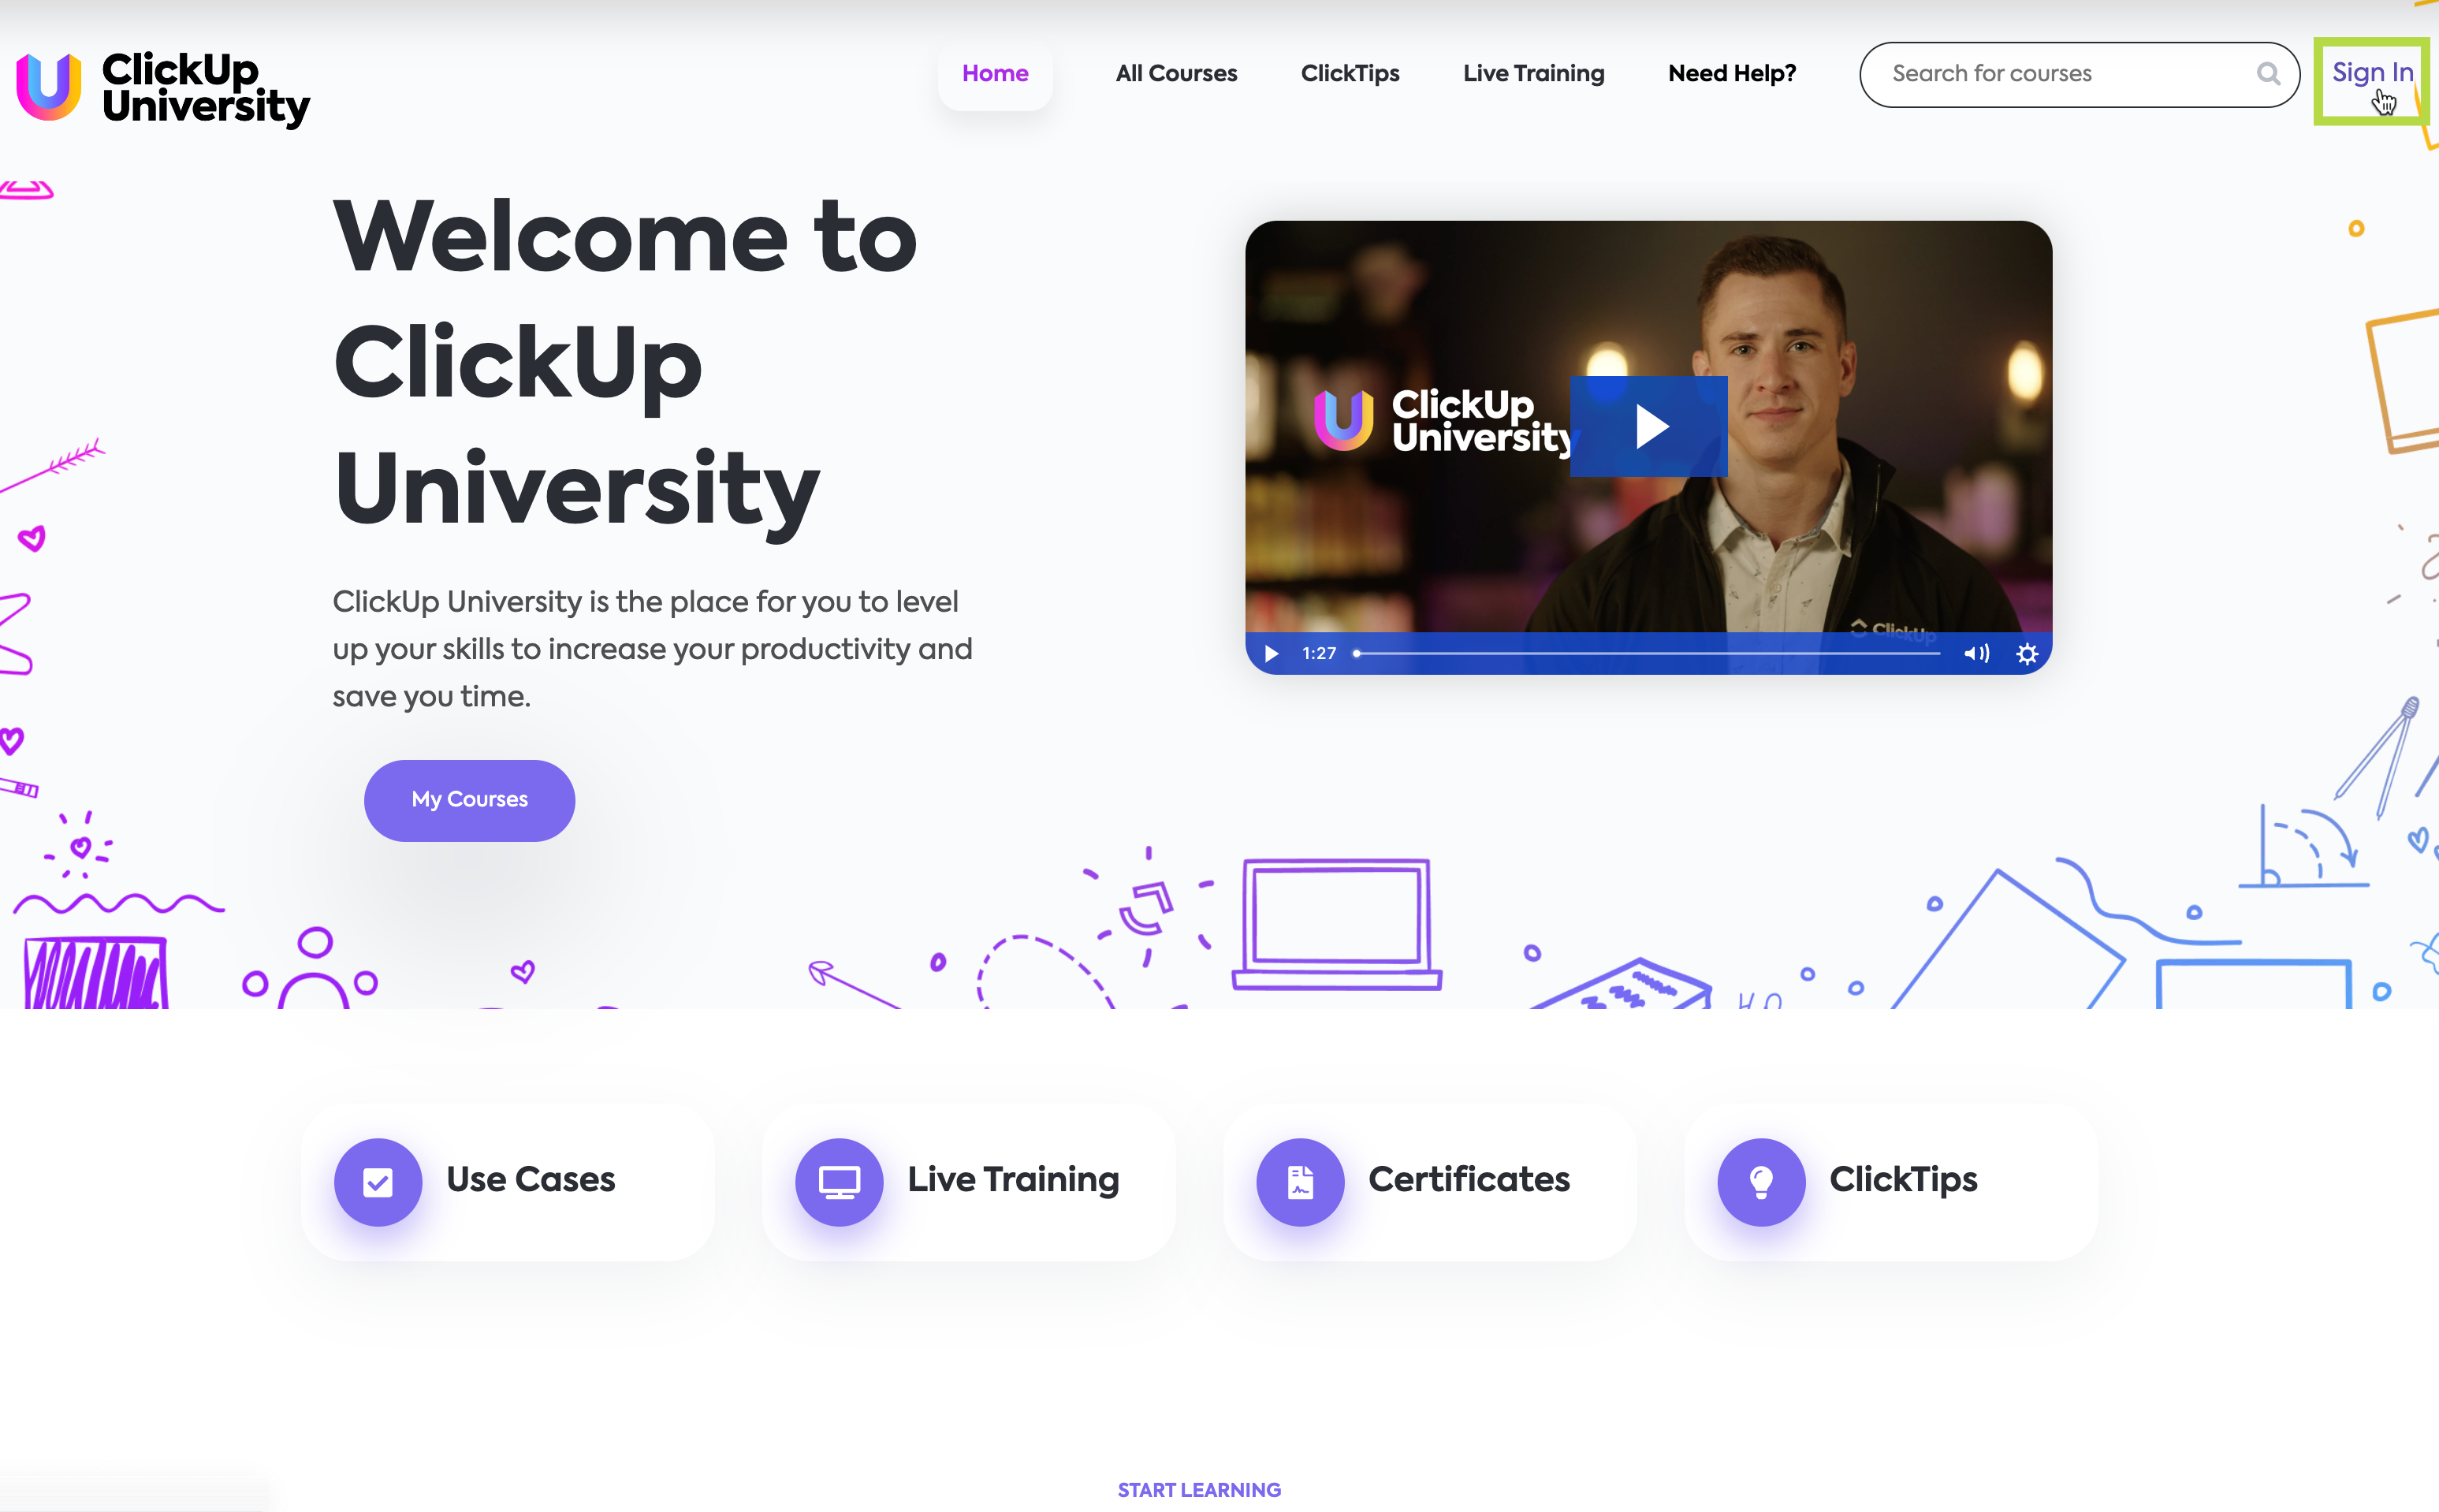 Screenshot of the ClickUp University homepage showing how to sign in.